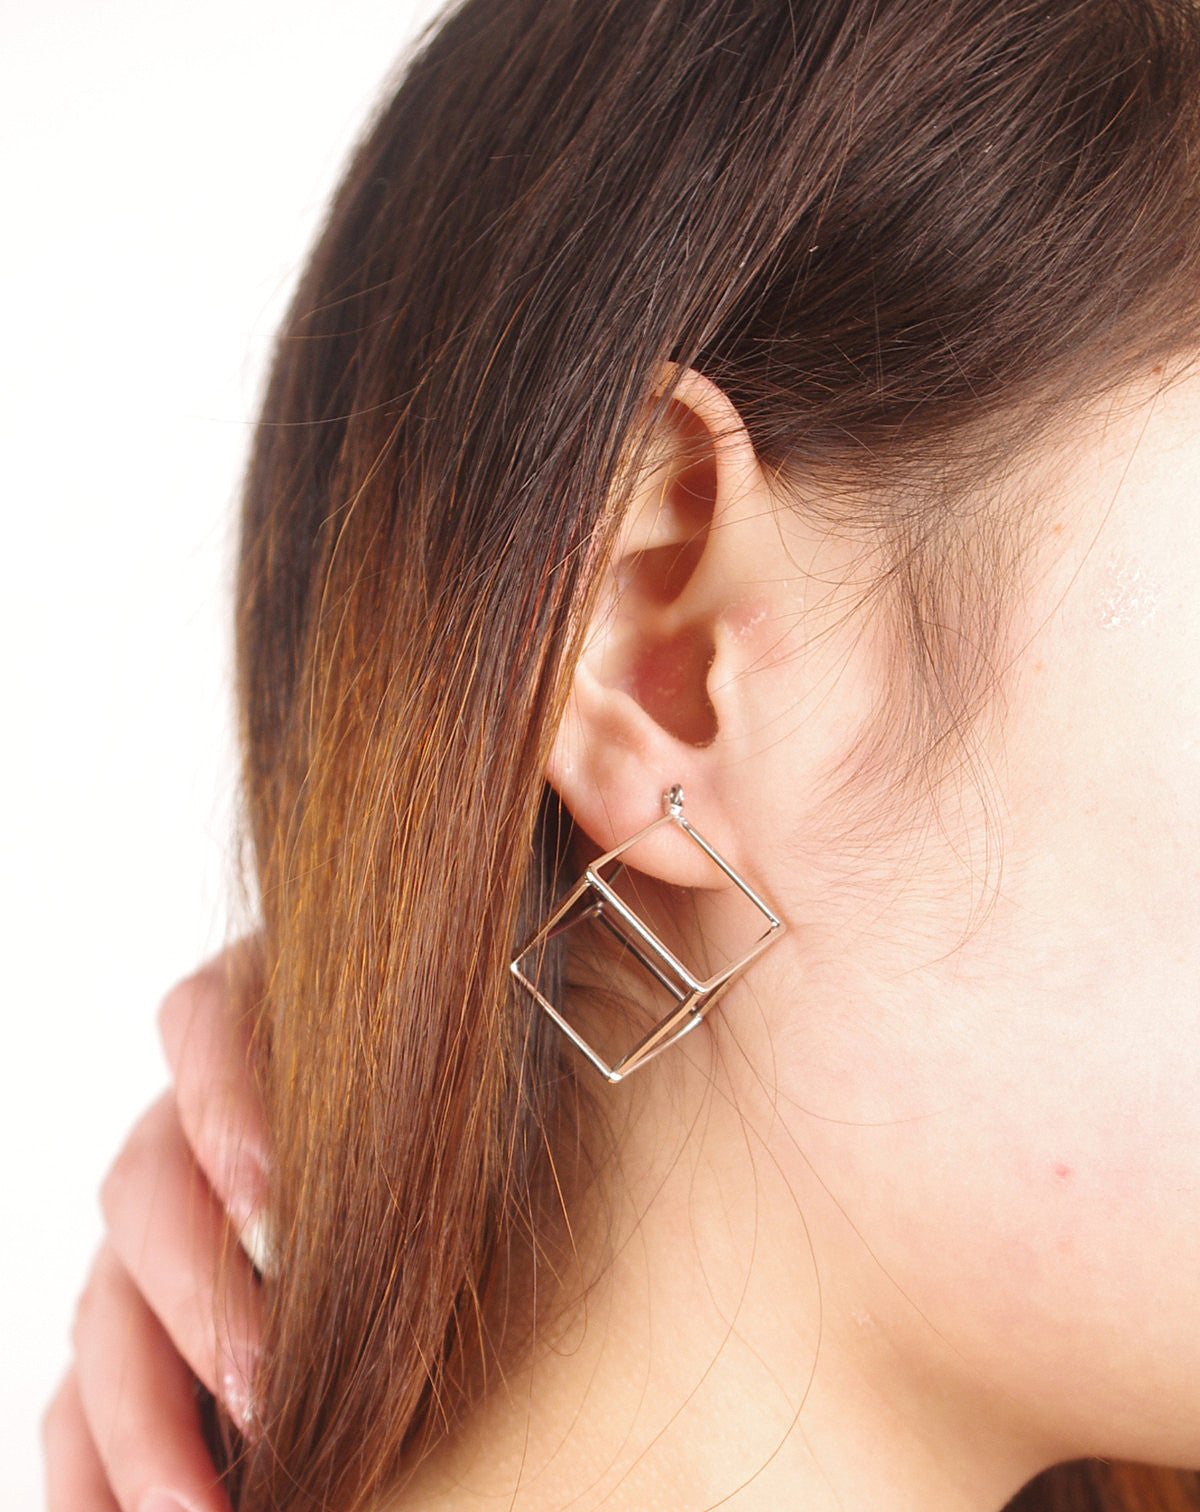 Fashion Cube Lady's Earrings - Oh Yours Fashion - 3